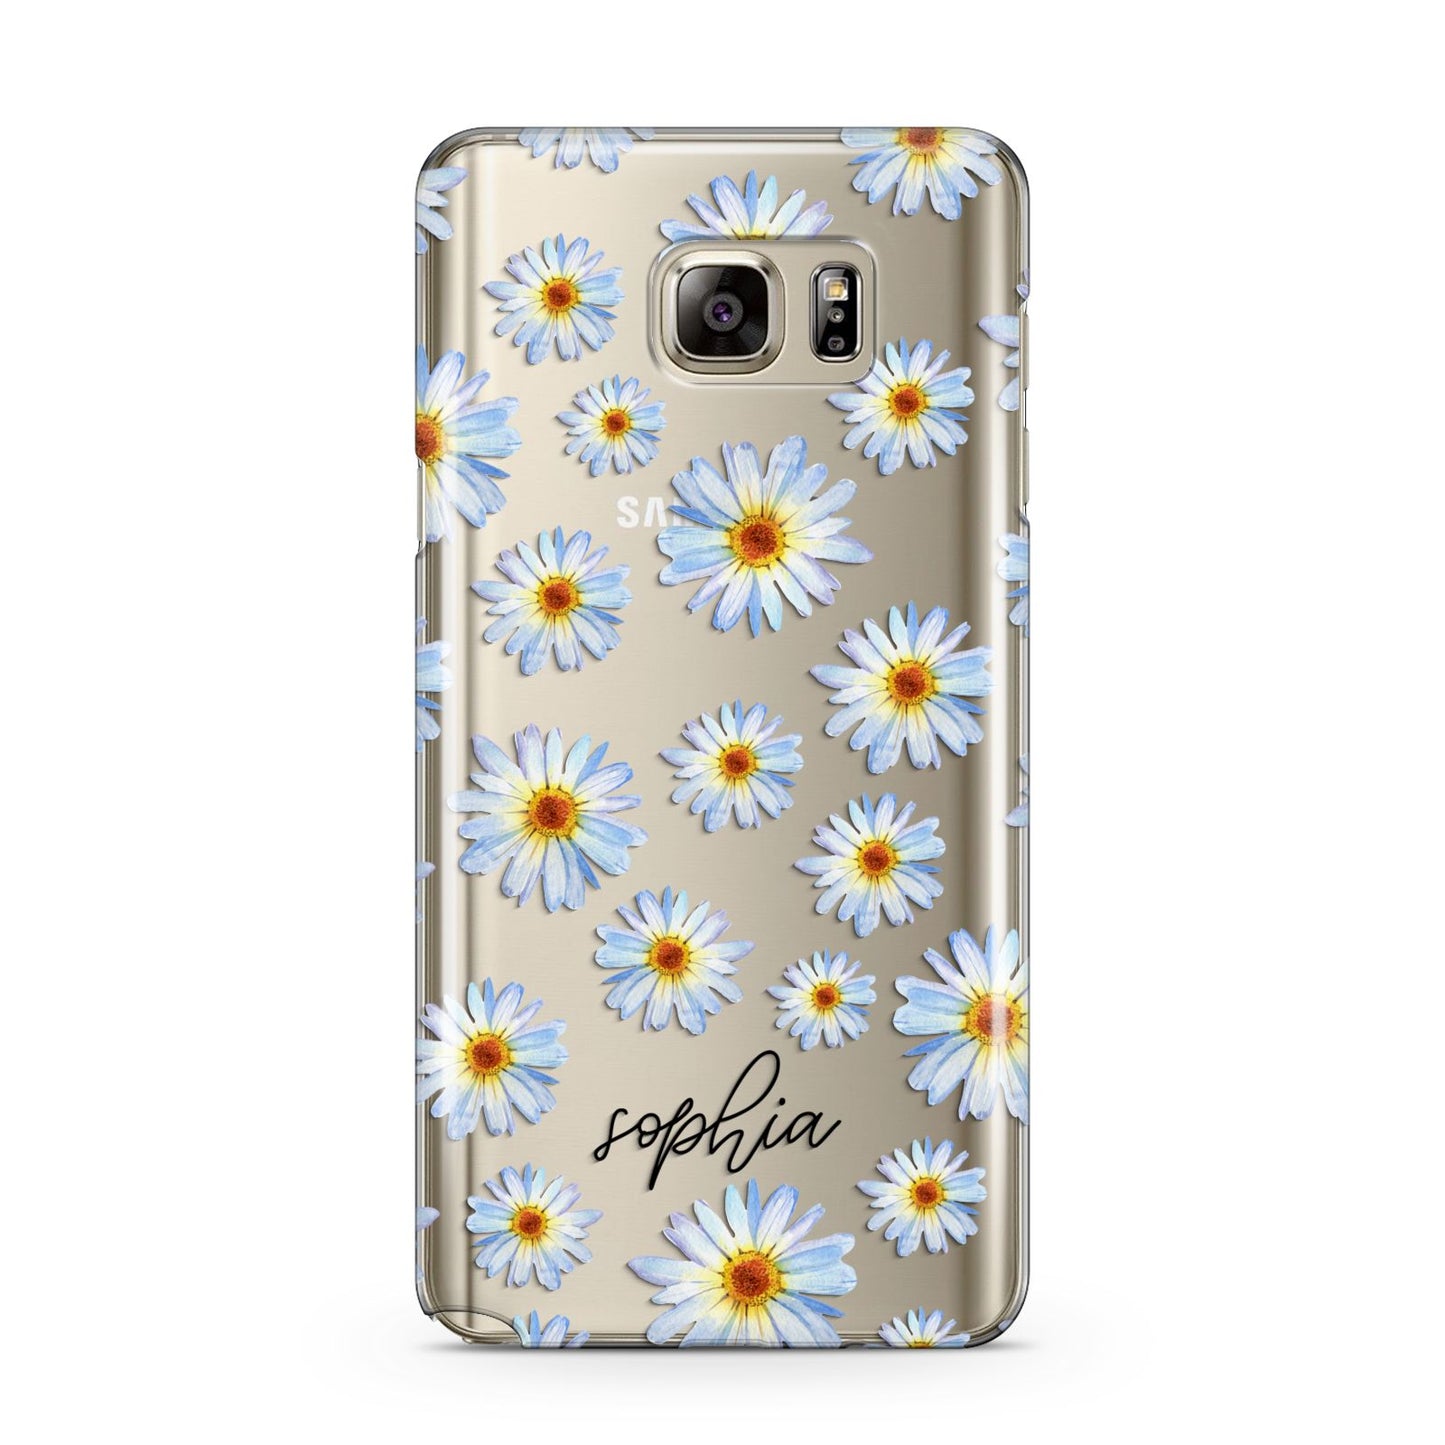 Personalised Daisy Samsung Galaxy Note 5 Case